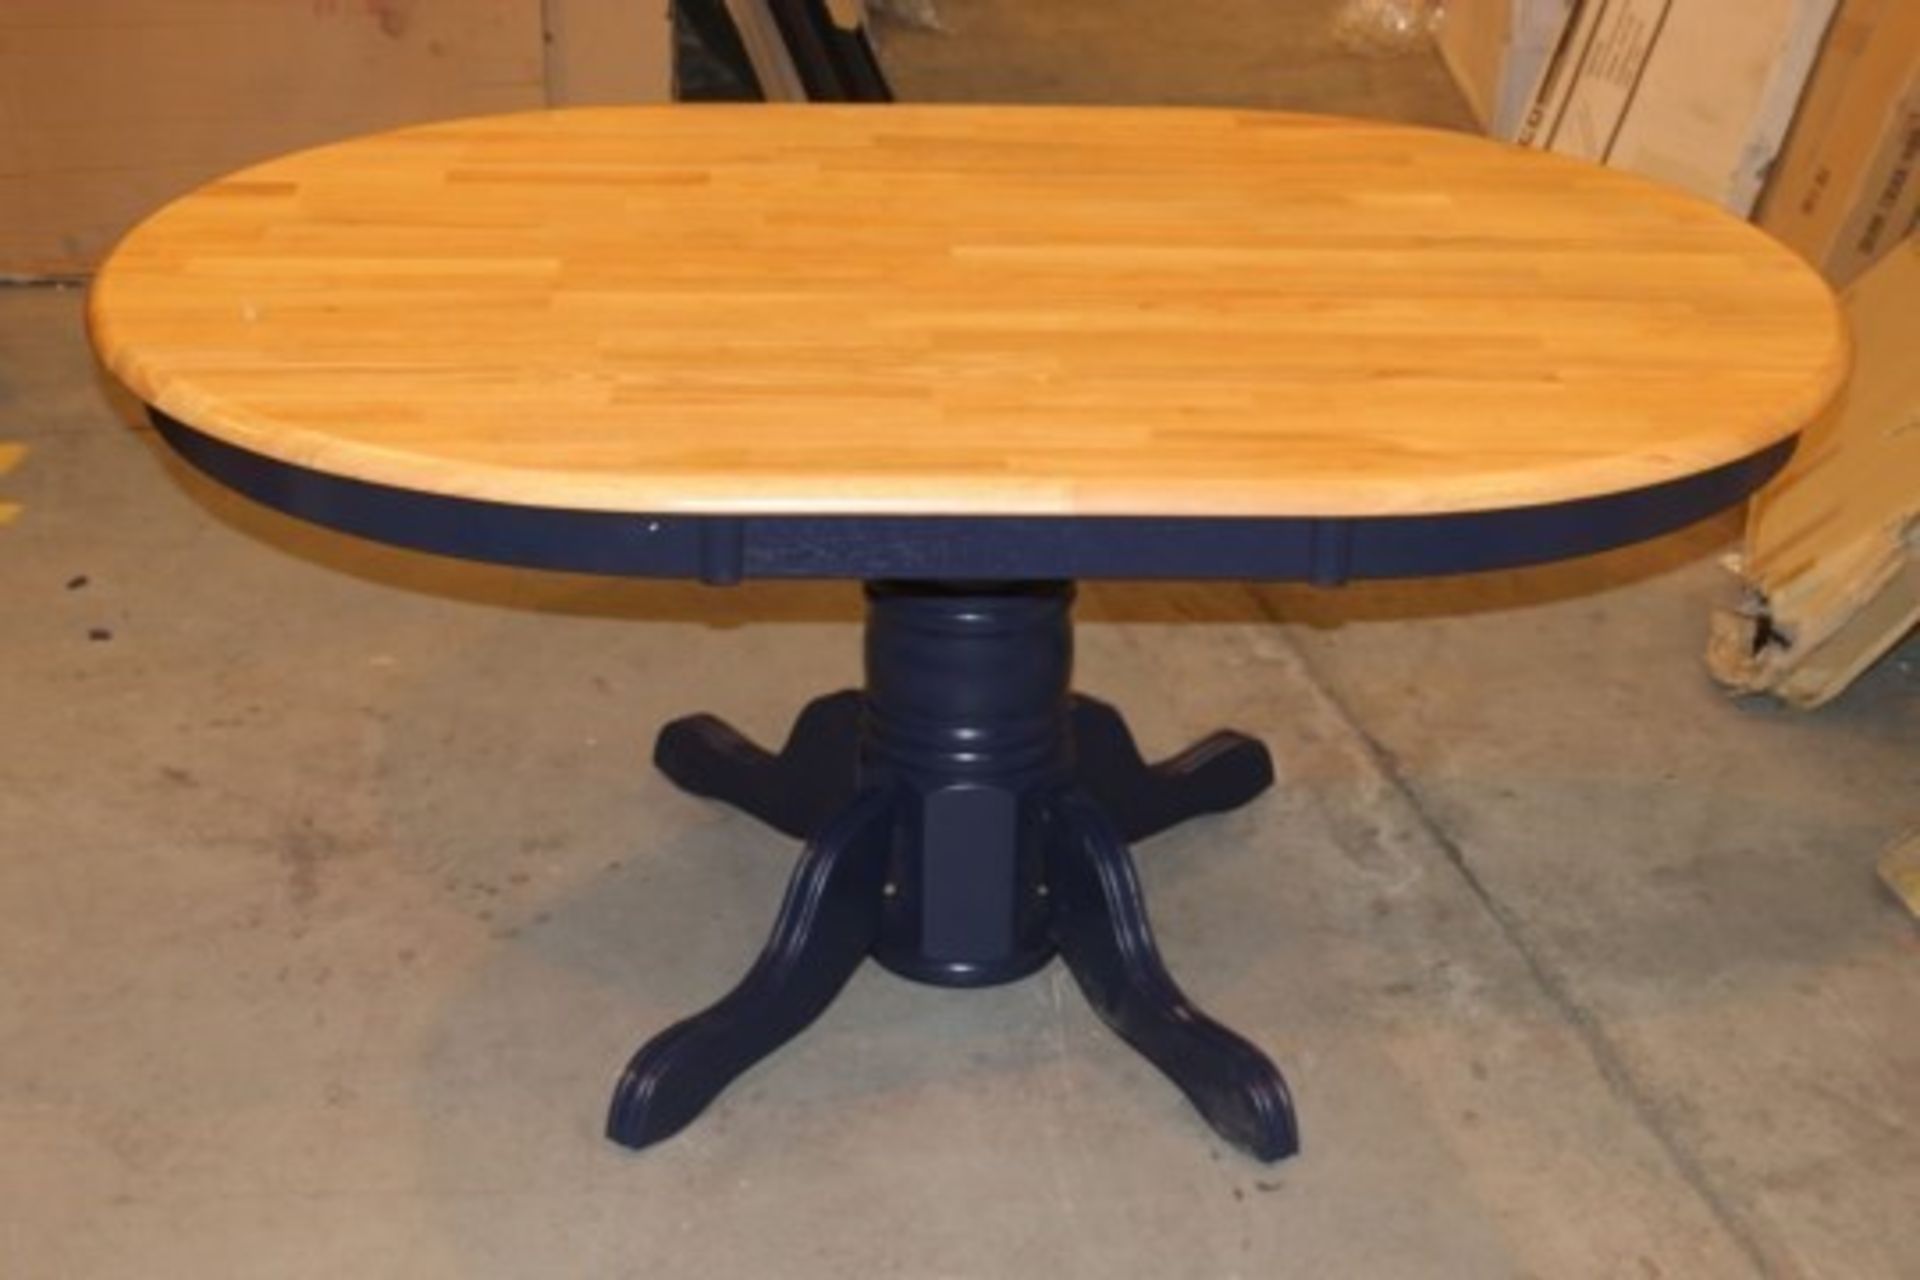 Boxed Oval Fixed Top Pedastal Table In Natural Blue RRP £300 (Images Are For Illustrations